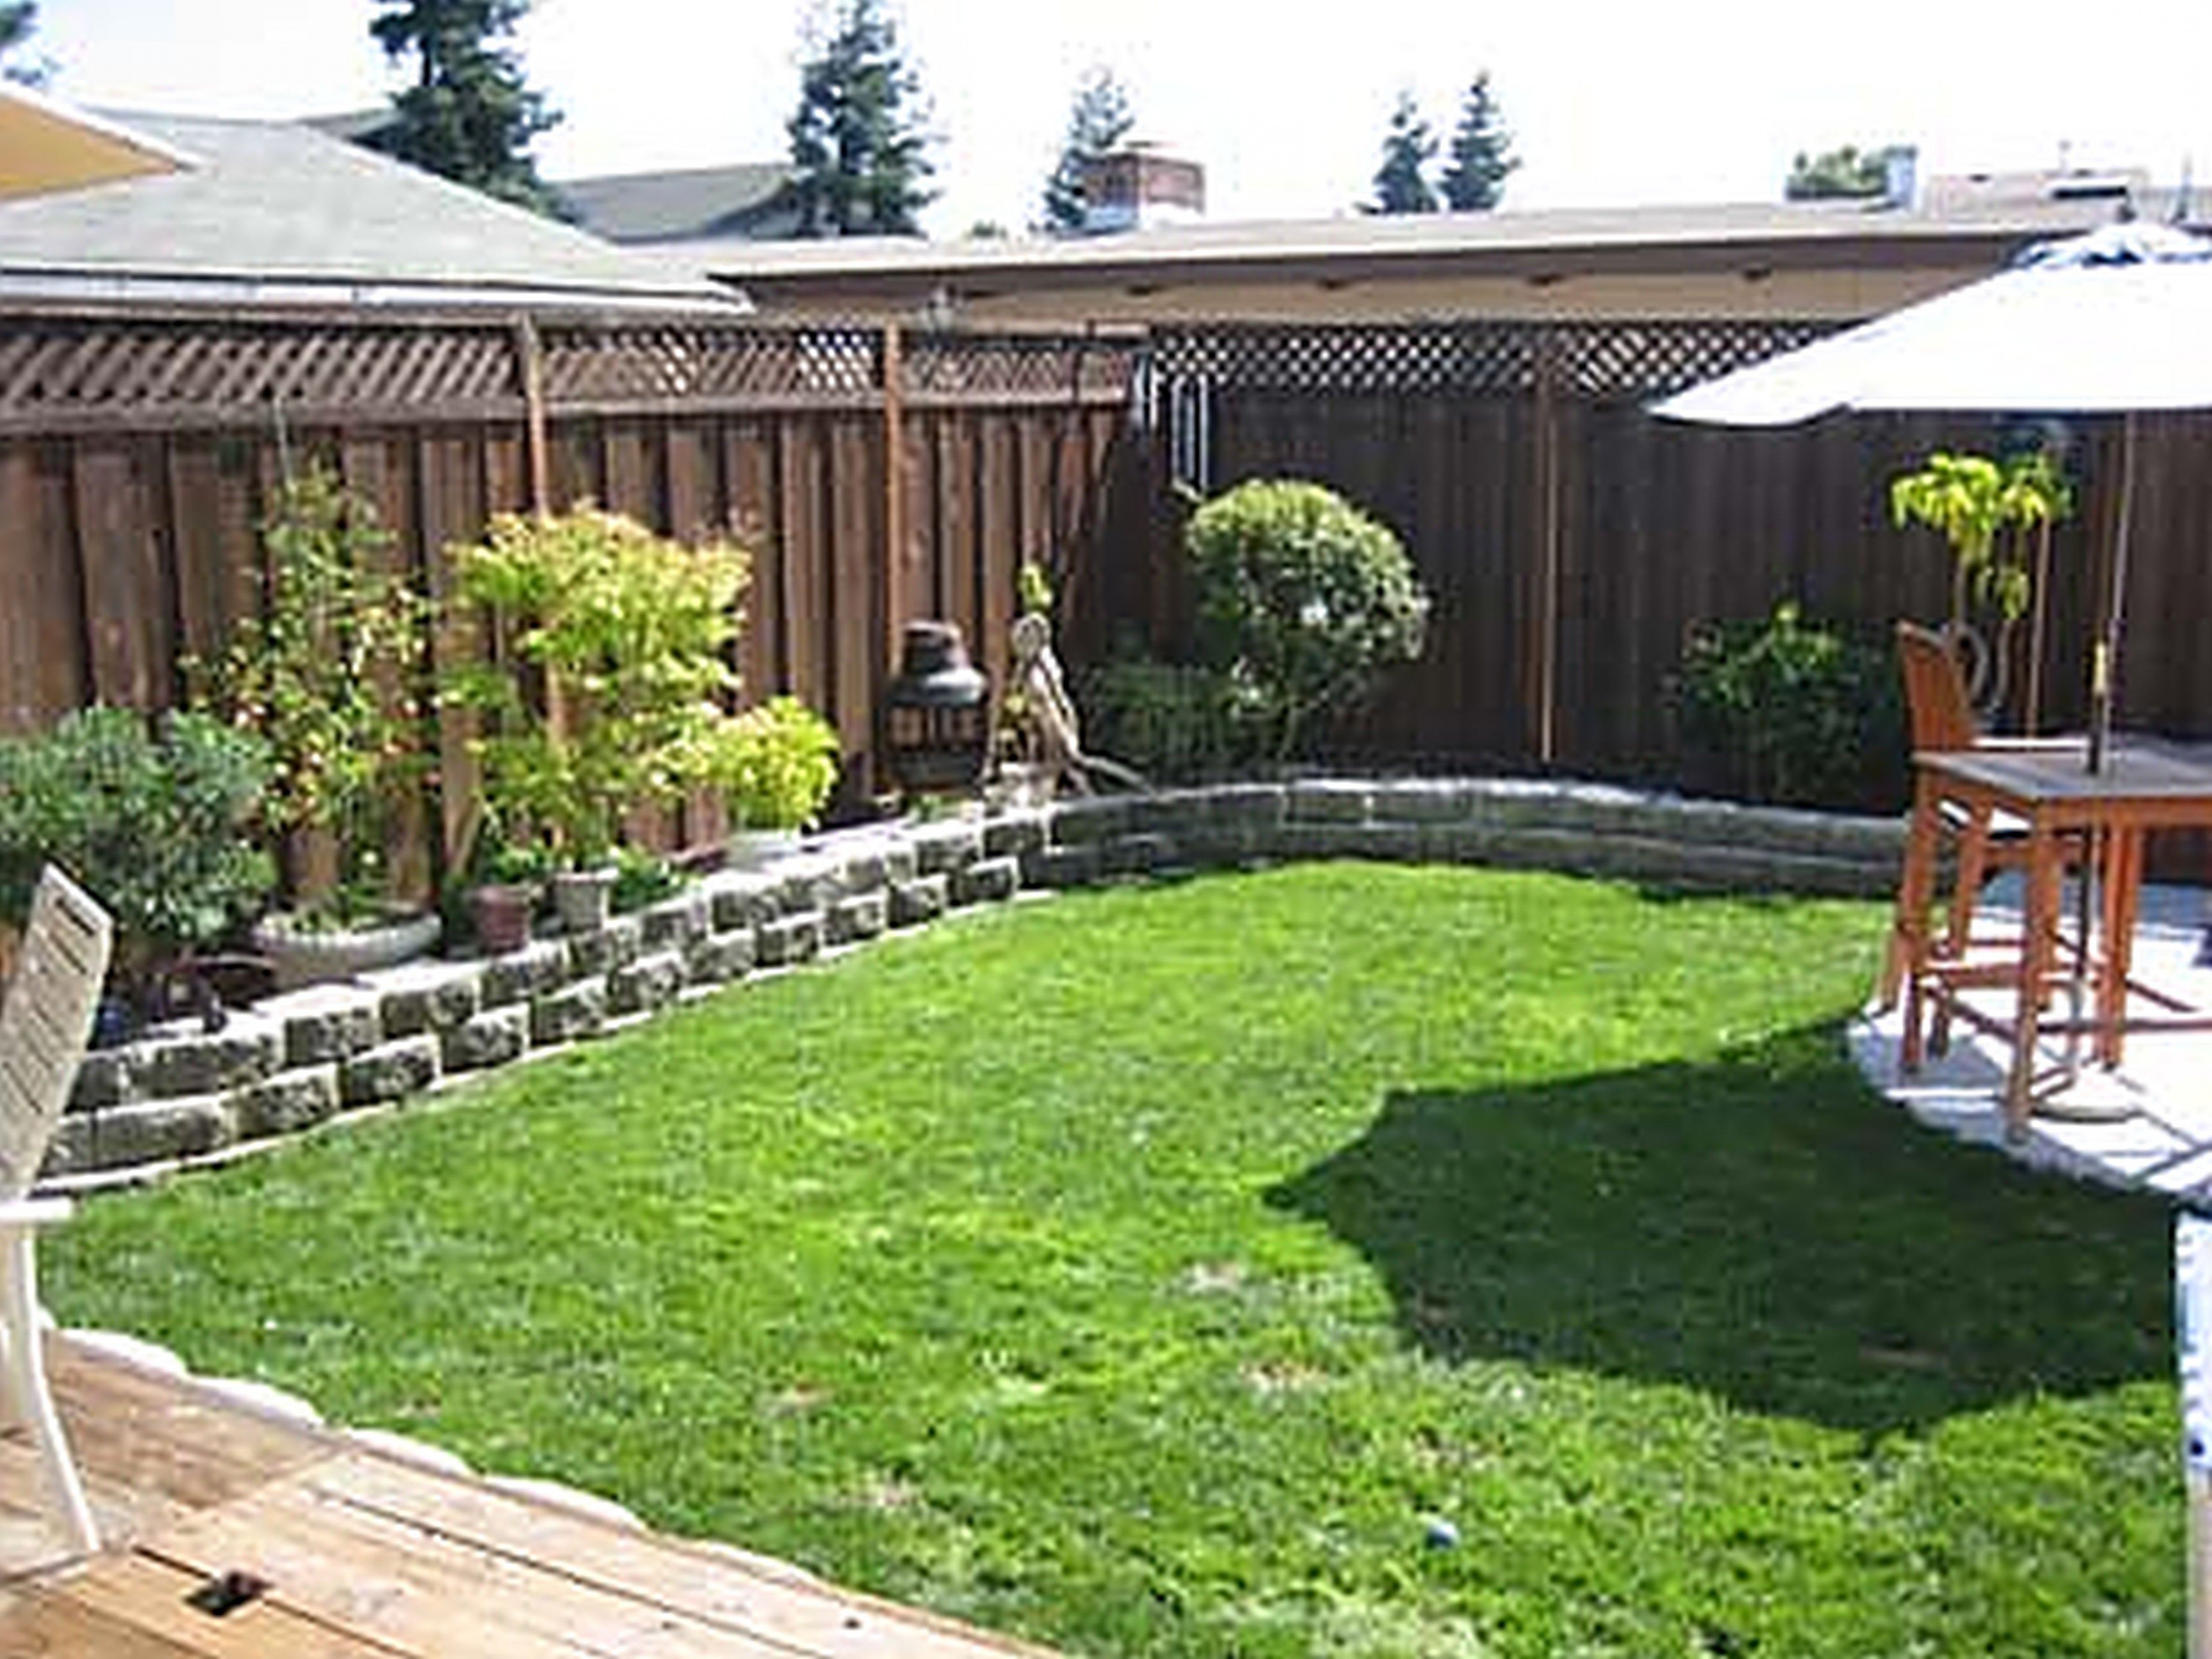 20 Budget Friendly Ideas For Backyards To Create An Outdoor Oasis